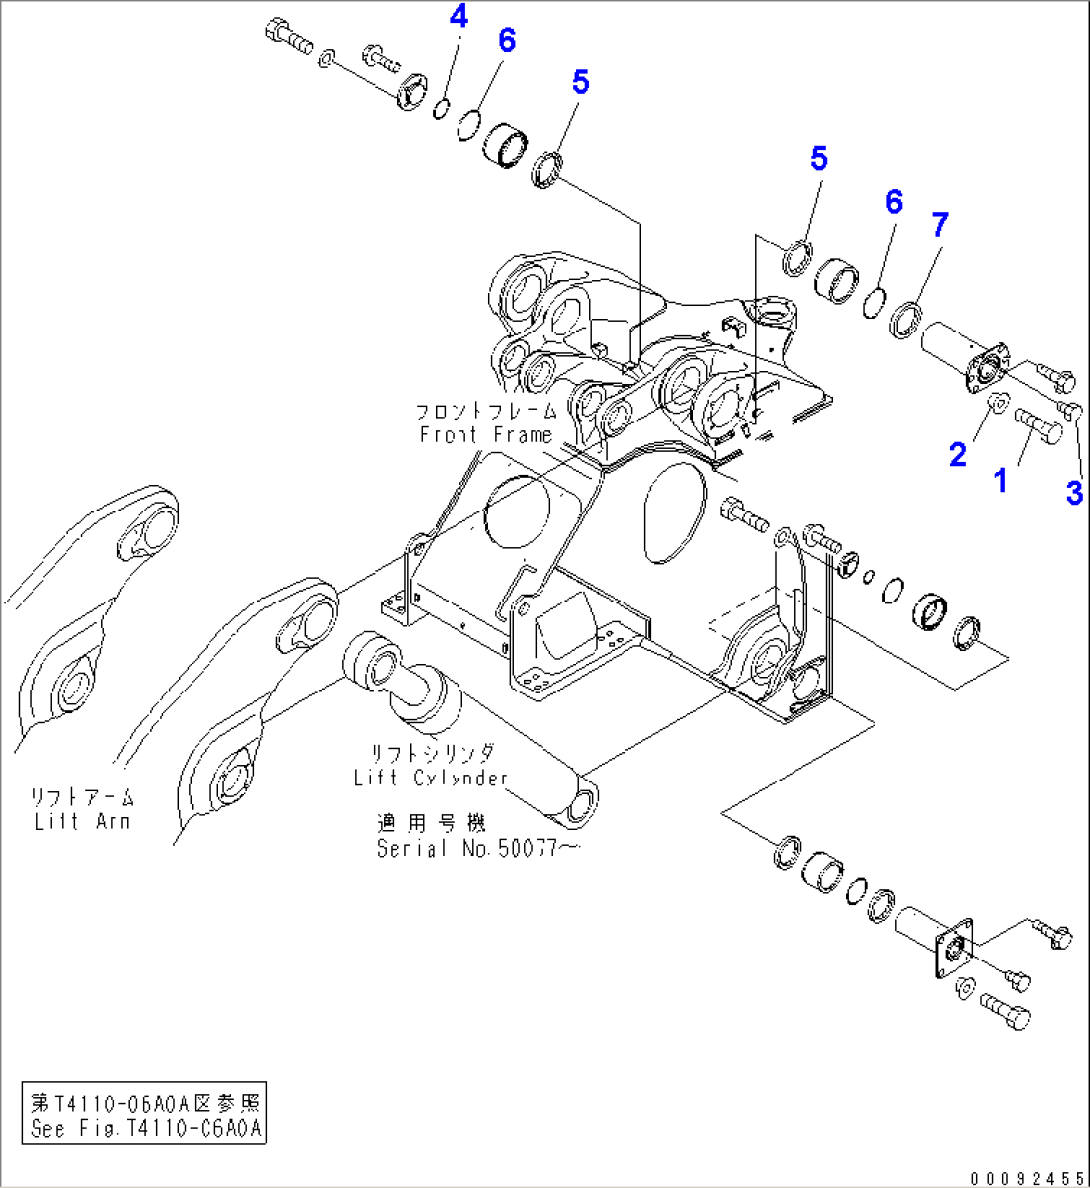 FRONT FRAME (LIFT ARM - FRONT FRAME MOUNTING PARTS)(#50079-)